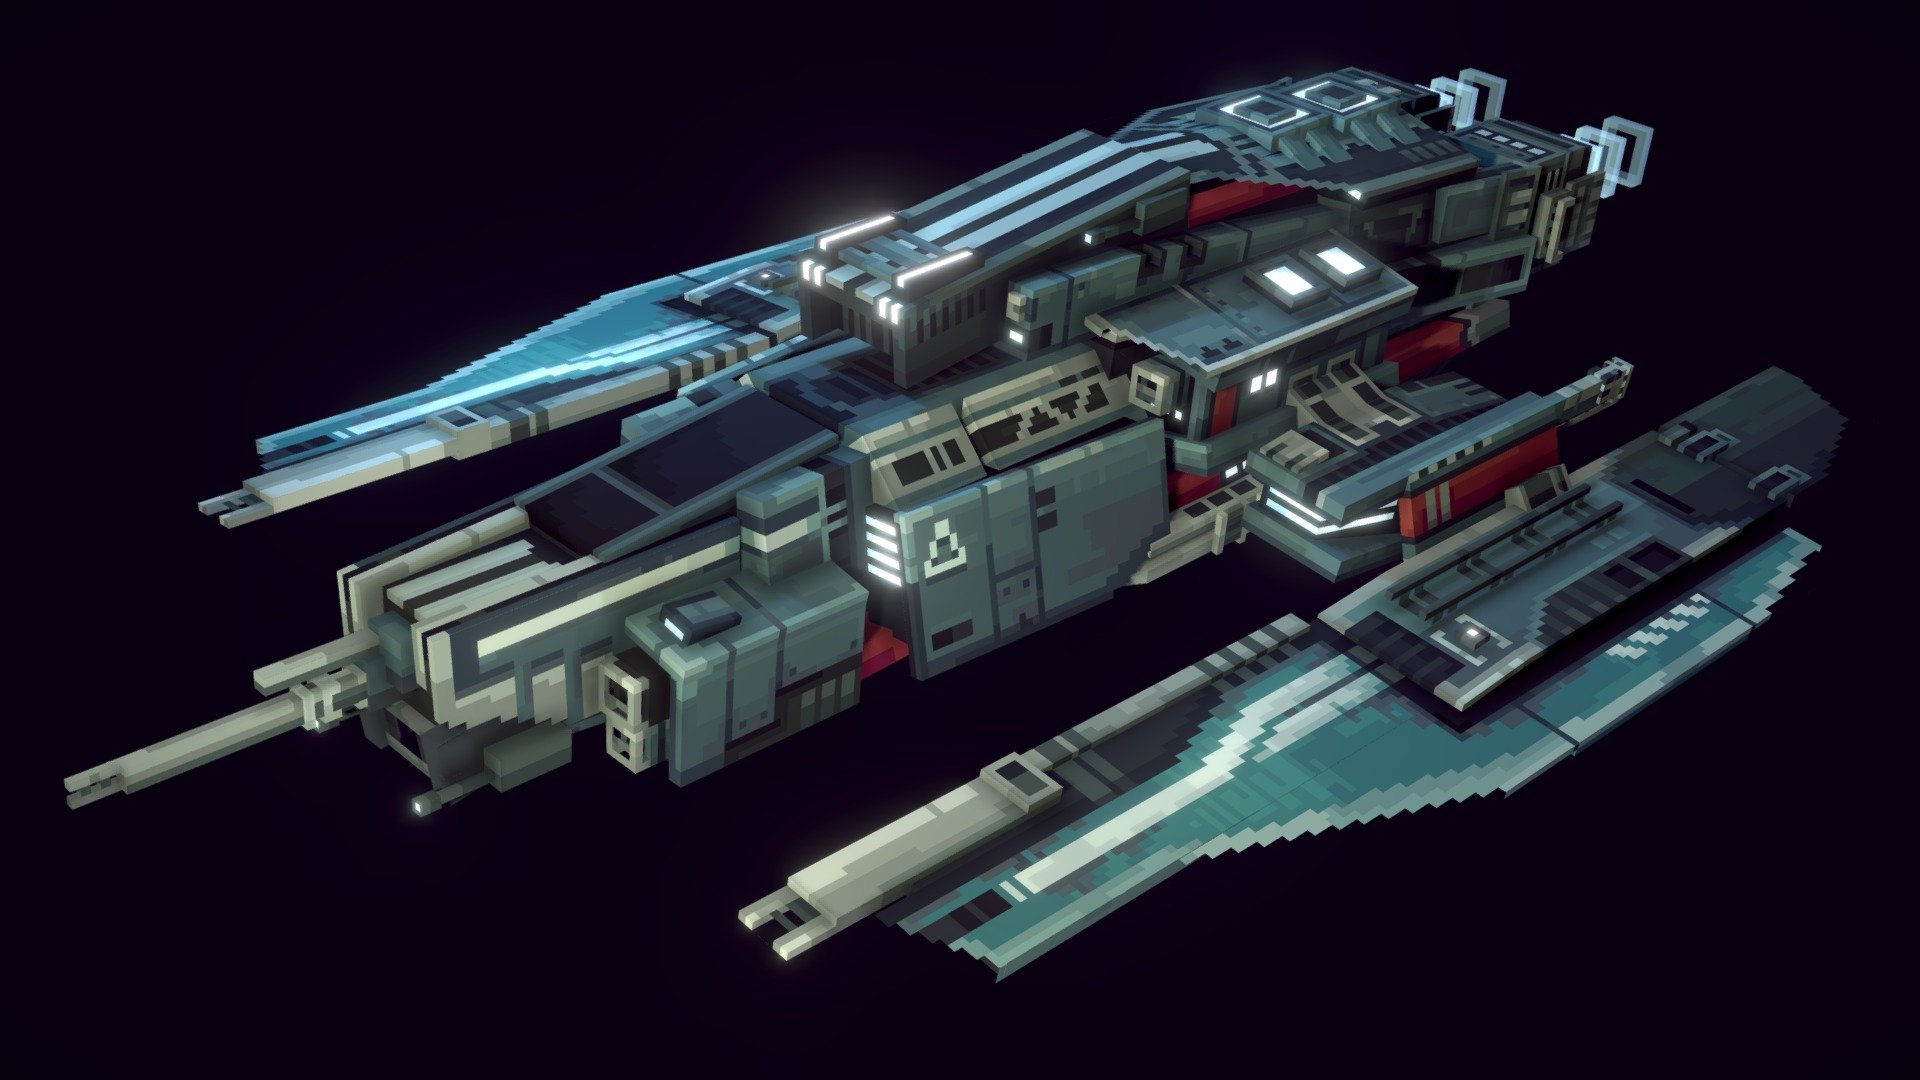 Heavy fighter spaceship model.

Made with Blockbench

Some progress screenshots:



 - Heavy Fighter Spaceship - 3D model by Wacky (@wackyblocks) 3d model